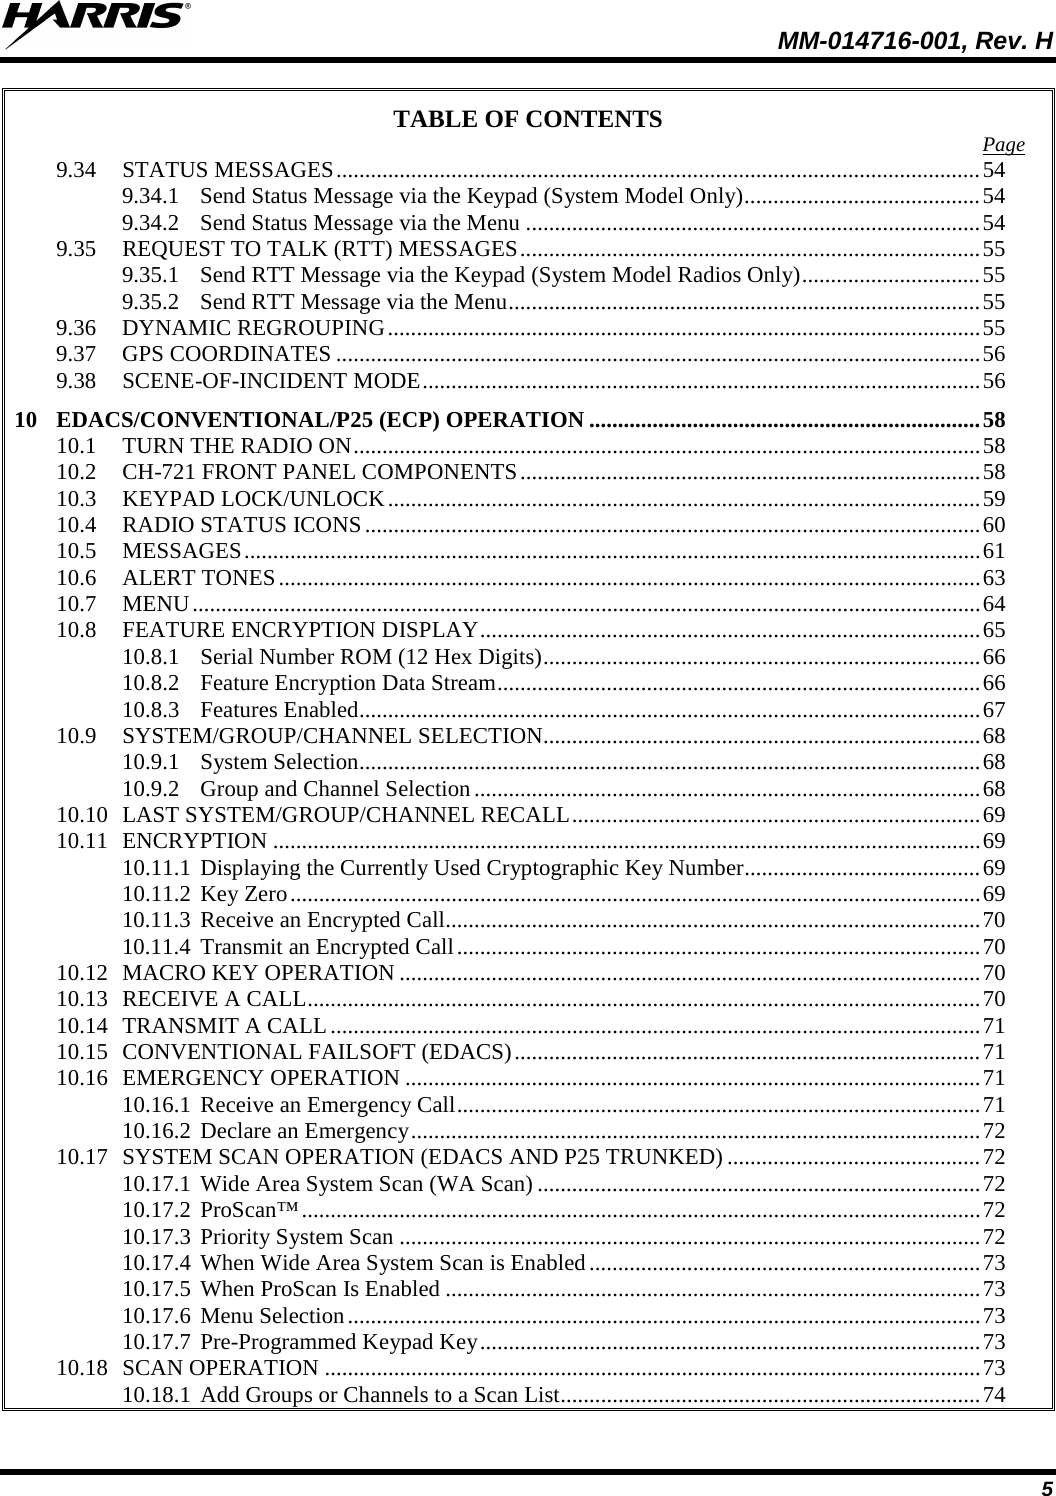  MM-014716-001, Rev. H 5 TABLE OF CONTENTS Page 9.34 STATUS MESSAGES ................................................................................................................ 54 9.34.1 Send Status Message via the Keypad (System Model Only) ......................................... 54 9.34.2 Send Status Message via the Menu ............................................................................... 54 9.35 REQUEST TO TALK (RTT) MESSAGES ................................................................................ 55 9.35.1 Send RTT Message via the Keypad (System Model Radios Only) ............................... 55 9.35.2 Send RTT Message via the Menu .................................................................................. 55 9.36 DYNAMIC REGROUPING ....................................................................................................... 55 9.37 GPS COORDINATES ................................................................................................................ 56 9.38 SCENE-OF-INCIDENT MODE ................................................................................................. 56 10 EDACS/CONVENTIONAL/P25 (ECP) OPERATION .................................................................... 58 10.1 TURN THE RADIO ON ............................................................................................................. 58 10.2 CH-721 FRONT PANEL COMPONENTS ................................................................................ 58 10.3 KEYPAD LOCK/UNLOCK ....................................................................................................... 59 10.4 RADIO STATUS ICONS ........................................................................................................... 60 10.5 MESSAGES ................................................................................................................................ 61 10.6 ALERT TONES .......................................................................................................................... 63 10.7 MENU ......................................................................................................................................... 64 10.8 FEATURE ENCRYPTION DISPLAY ....................................................................................... 65 10.8.1 Serial Number ROM (12 Hex Digits) ............................................................................ 66 10.8.2 Feature Encryption Data Stream .................................................................................... 66 10.8.3 Features Enabled ............................................................................................................ 67 10.9 SYSTEM/GROUP/CHANNEL SELECTION............................................................................ 68 10.9.1 System Selection ............................................................................................................ 68 10.9.2 Group and Channel Selection ........................................................................................ 68 10.10 LAST SYSTEM/GROUP/CHANNEL RECALL ....................................................................... 69 10.11 ENCRYPTION ........................................................................................................................... 69 10.11.1 Displaying the Currently Used Cryptographic Key Number ......................................... 69 10.11.2 Key Zero ........................................................................................................................ 69 10.11.3 Receive an Encrypted Call............................................................................................. 70 10.11.4 Transmit an Encrypted Call ........................................................................................... 70 10.12 MACRO KEY OPERATION ..................................................................................................... 70 10.13 RECEIVE A CALL ..................................................................................................................... 70 10.14 TRANSMIT A CALL ................................................................................................................. 71 10.15 CONVENTIONAL FAILSOFT (EDACS) ................................................................................. 71 10.16 EMERGENCY OPERATION .................................................................................................... 71 10.16.1 Receive an Emergency Call ........................................................................................... 71 10.16.2 Declare an Emergency ................................................................................................... 72 10.17 SYSTEM SCAN OPERATION (EDACS AND P25 TRUNKED) ............................................ 72 10.17.1 Wide Area System Scan (WA Scan) ............................................................................. 72 10.17.2 ProScan™ ...................................................................................................................... 72 10.17.3 Priority System Scan ..................................................................................................... 72 10.17.4 When Wide Area System Scan is Enabled .................................................................... 73 10.17.5 When ProScan Is Enabled ............................................................................................. 73 10.17.6 Menu Selection .............................................................................................................. 73 10.17.7 Pre-Programmed Keypad Key ....................................................................................... 73 10.18 SCAN OPERATION .................................................................................................................. 73 10.18.1 Add Groups or Channels to a Scan List ......................................................................... 74 